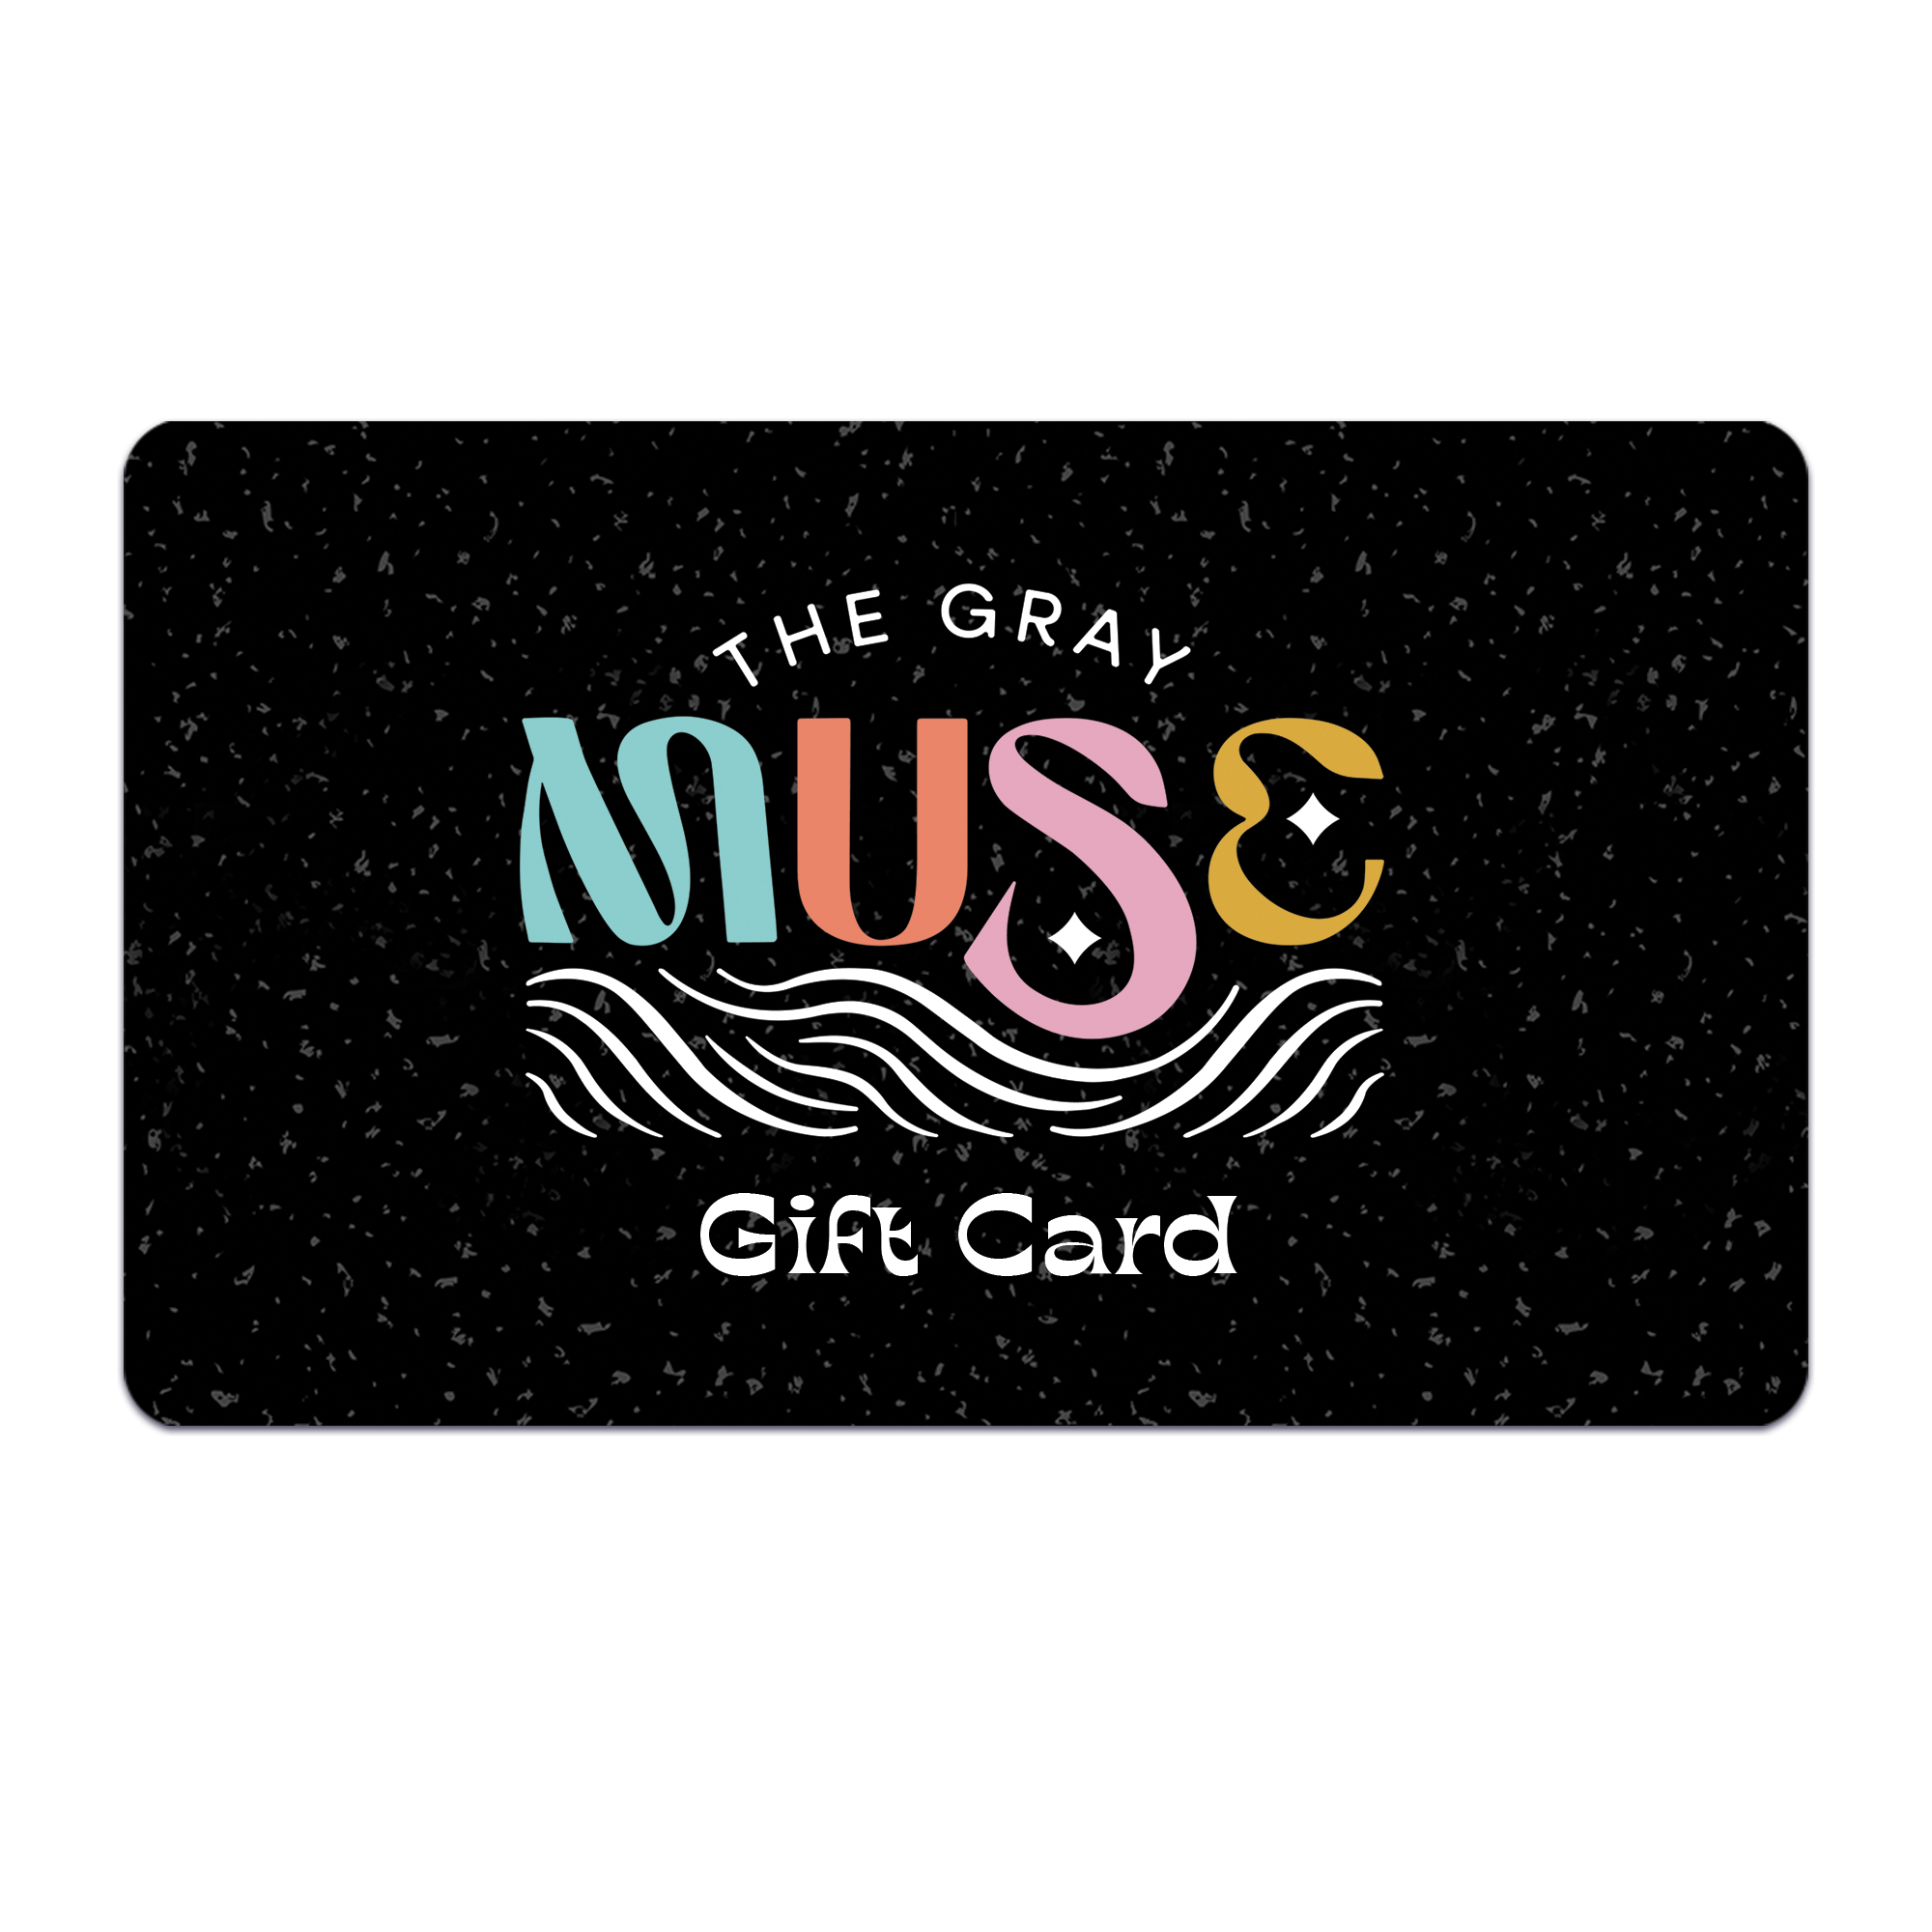 Digital gift card for The Gray Muse